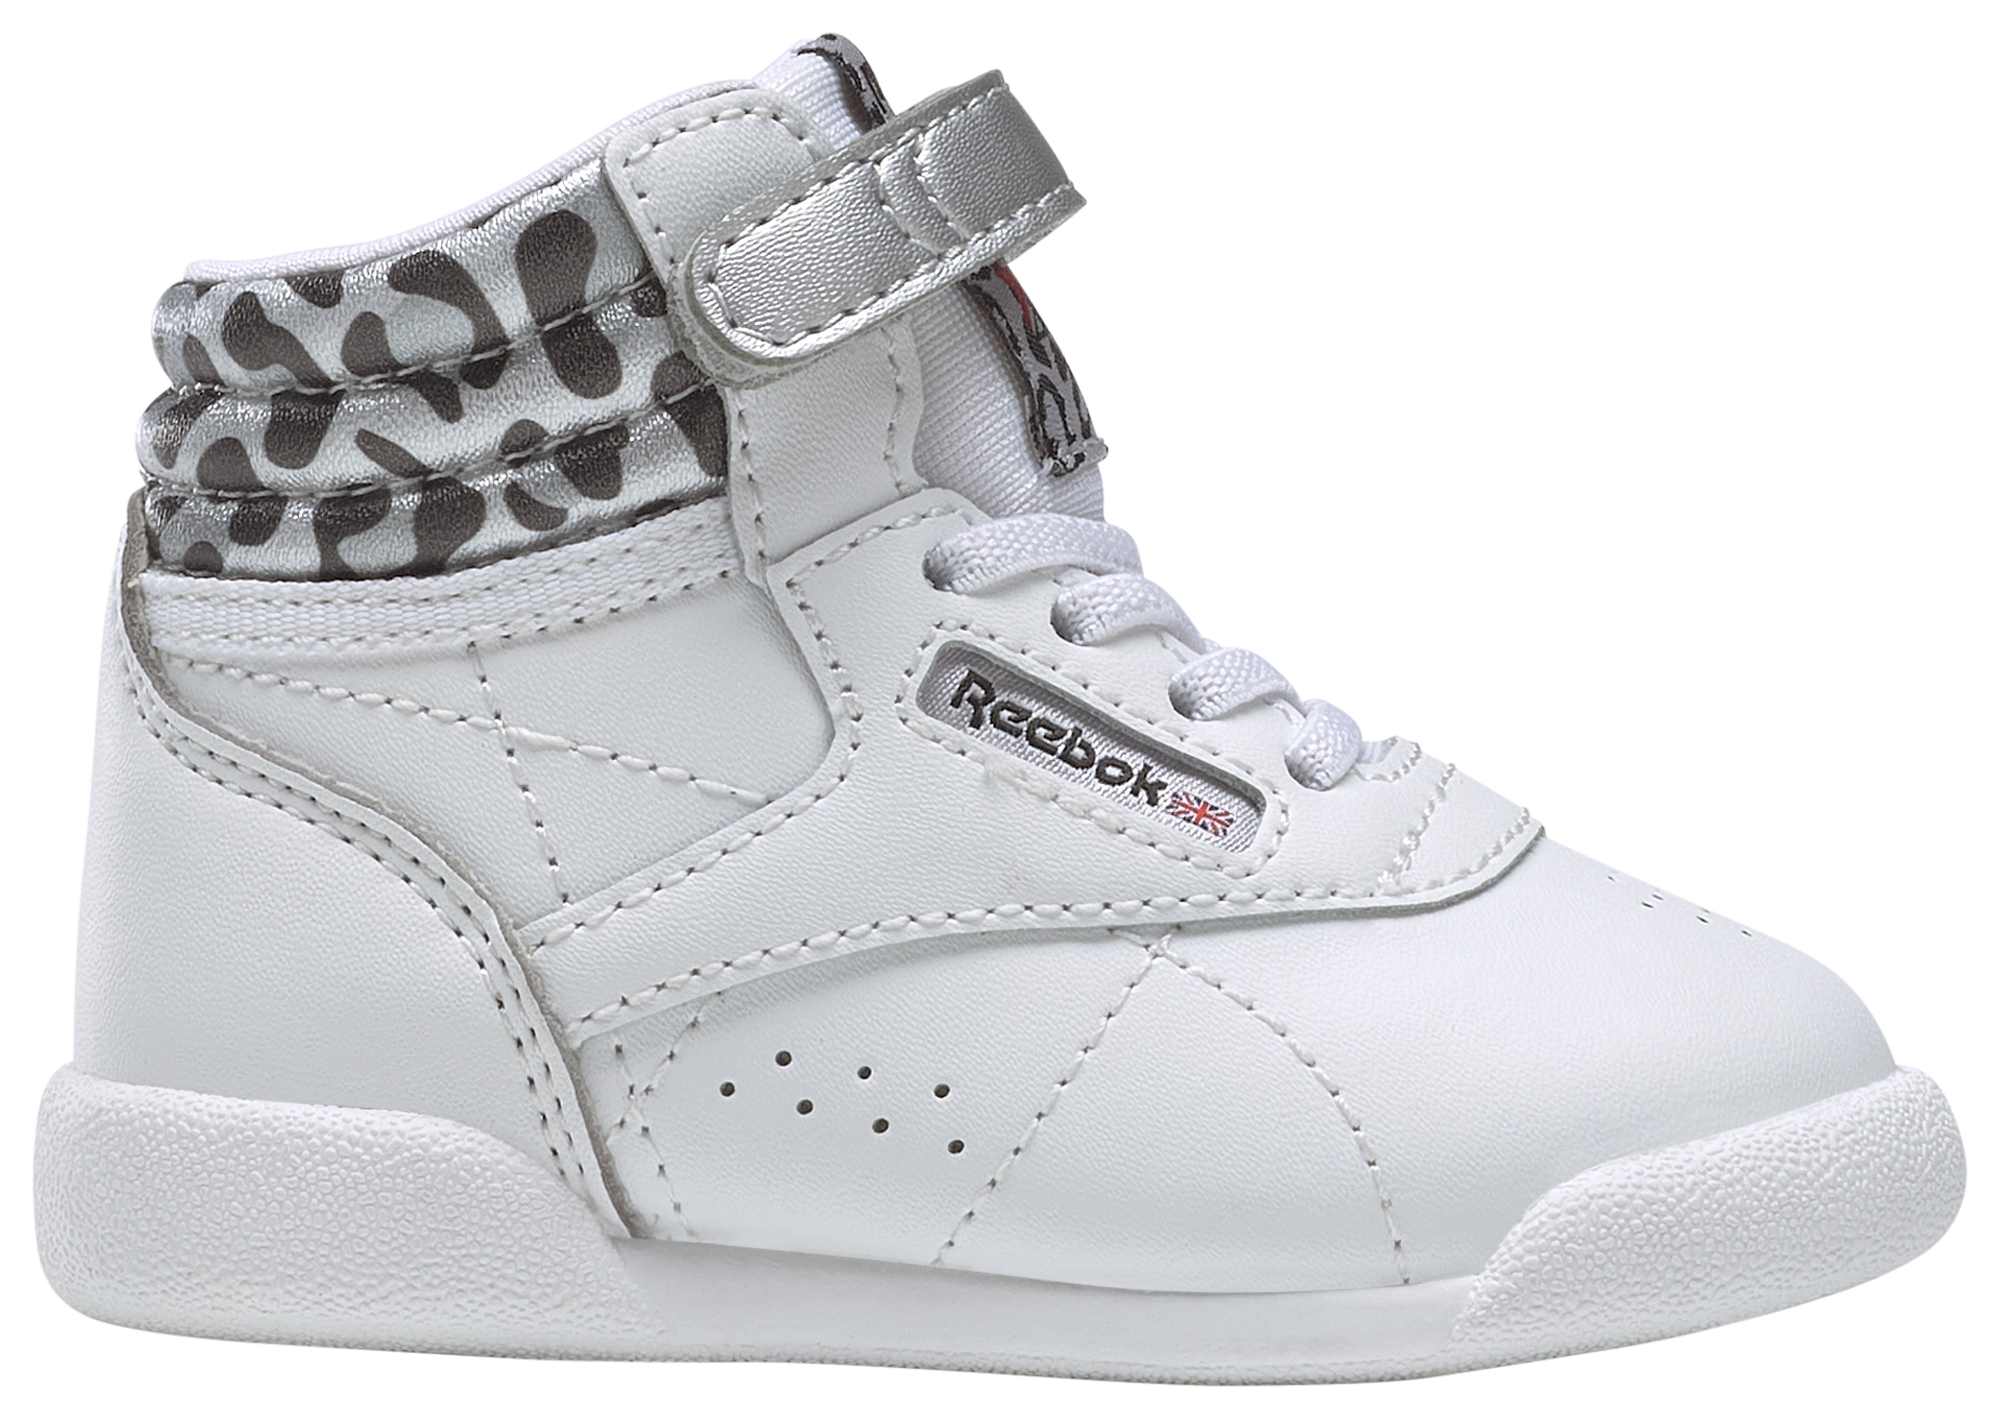 Reebok Freestyle Snow Girls' Toddler | The Shops at Bend